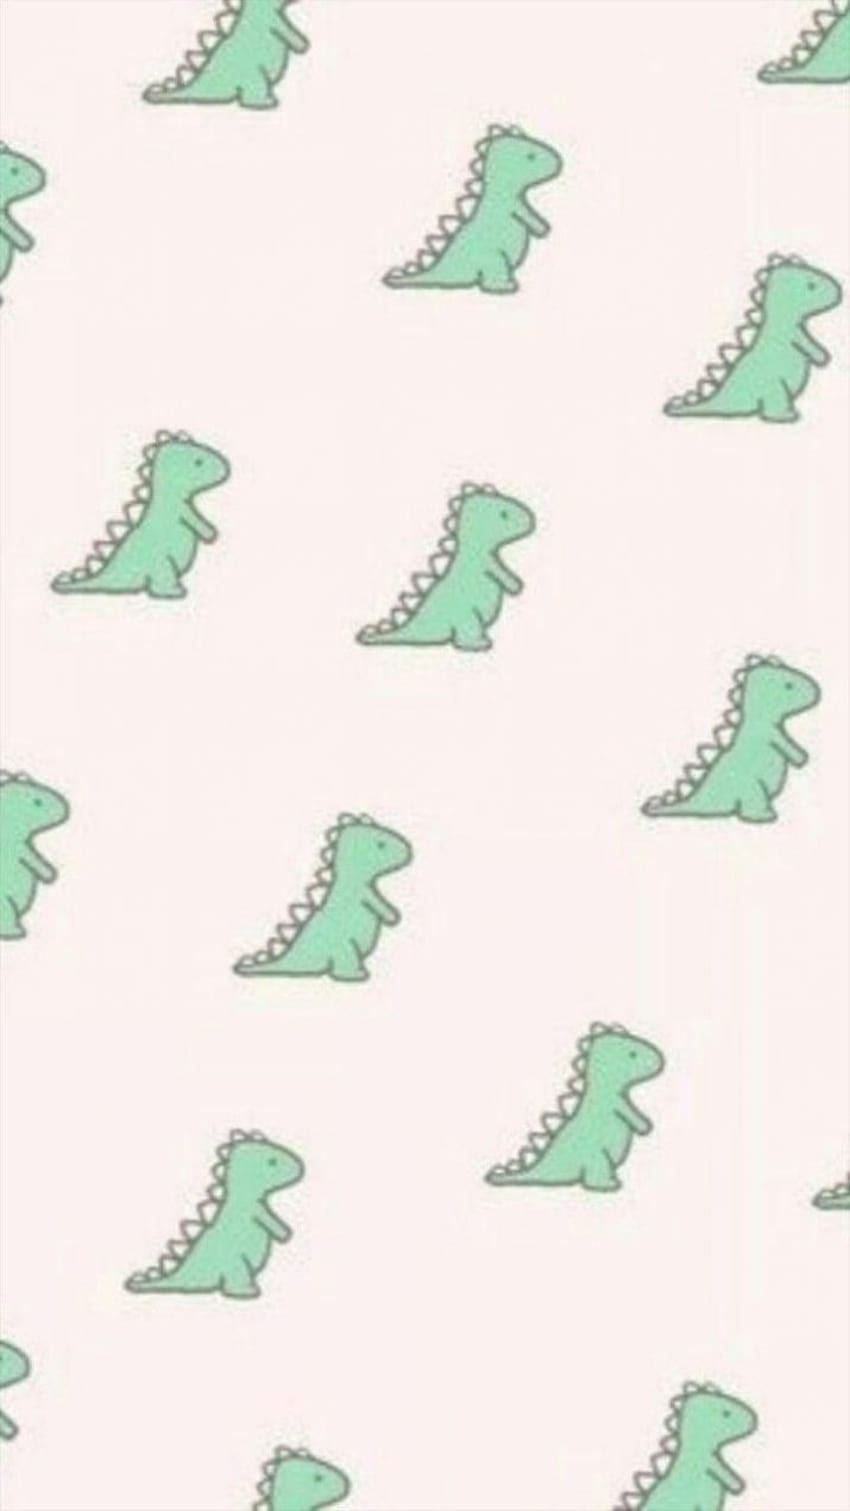 Premium Vector  Seamless pattern with cute dinosaur stegosaurus and  triceratops in kawaii style vector